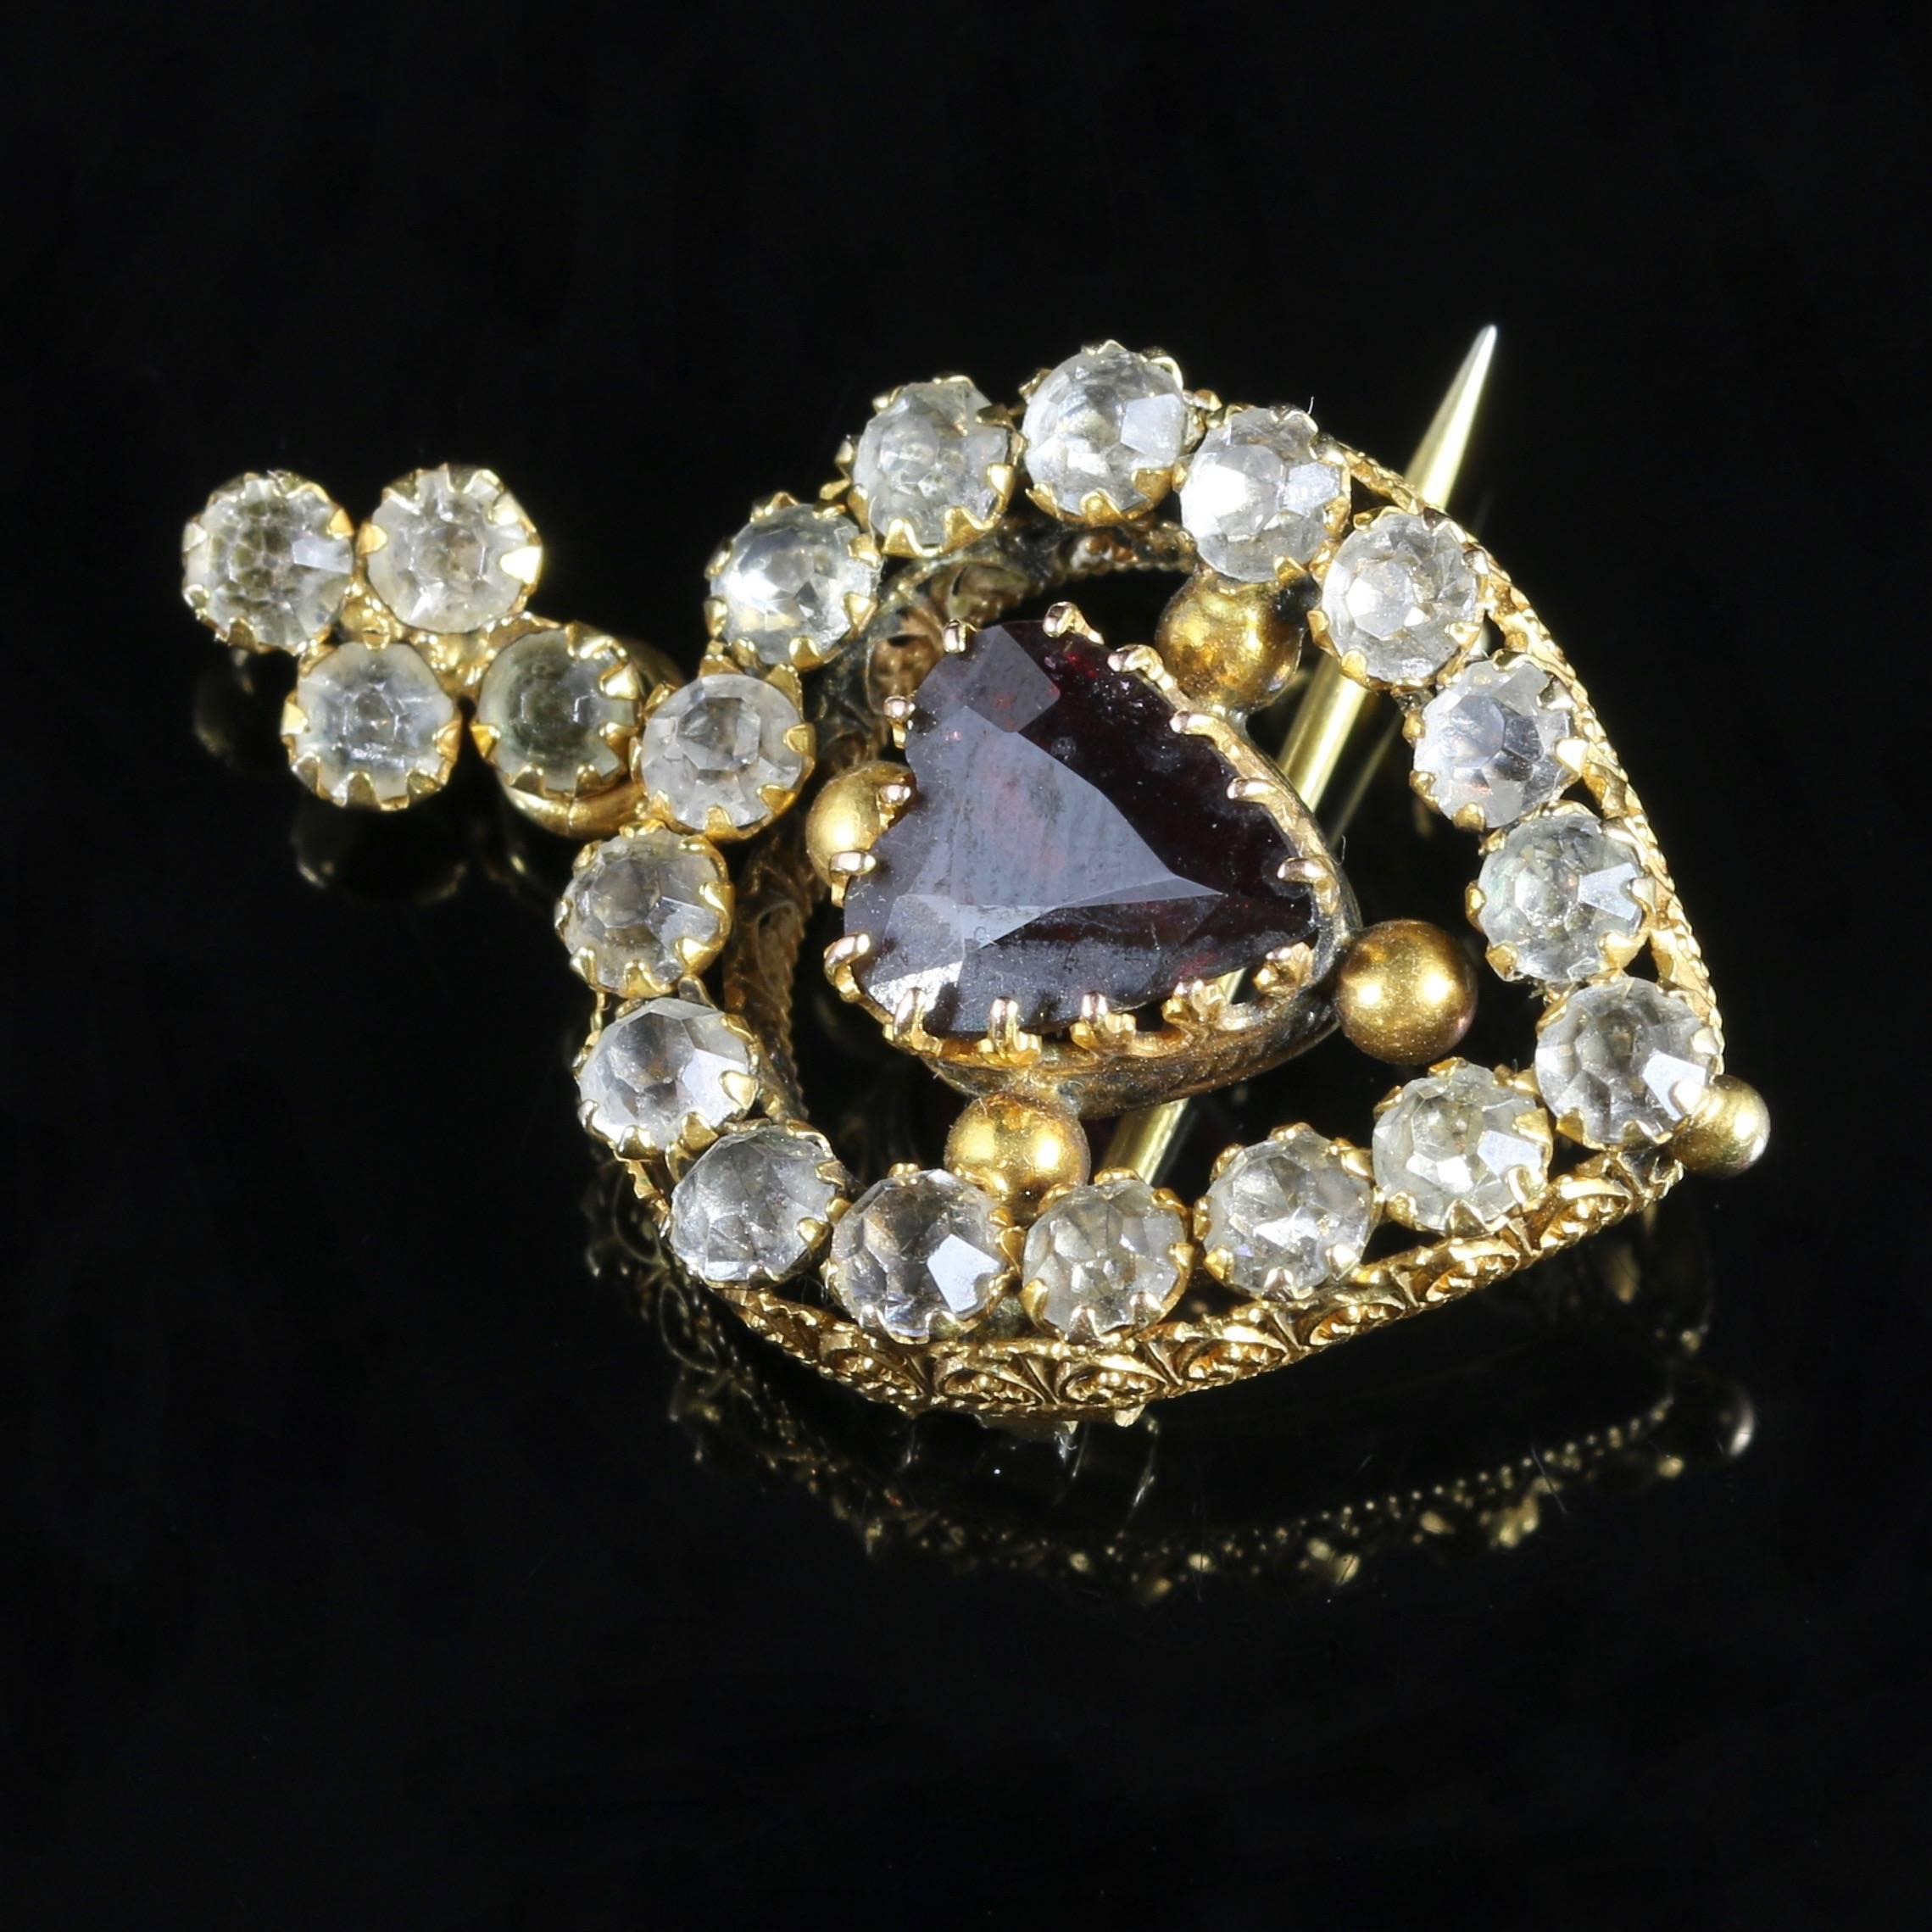 This very beautiful 18ct Gold Victorian pendant brooch is set with a Garnet heart in the centre.

The Garnet is over 1ct in size, and hand cut to perfection.

The Garnet is a stone of purity and truth as well as a symbol of love and compassion. The